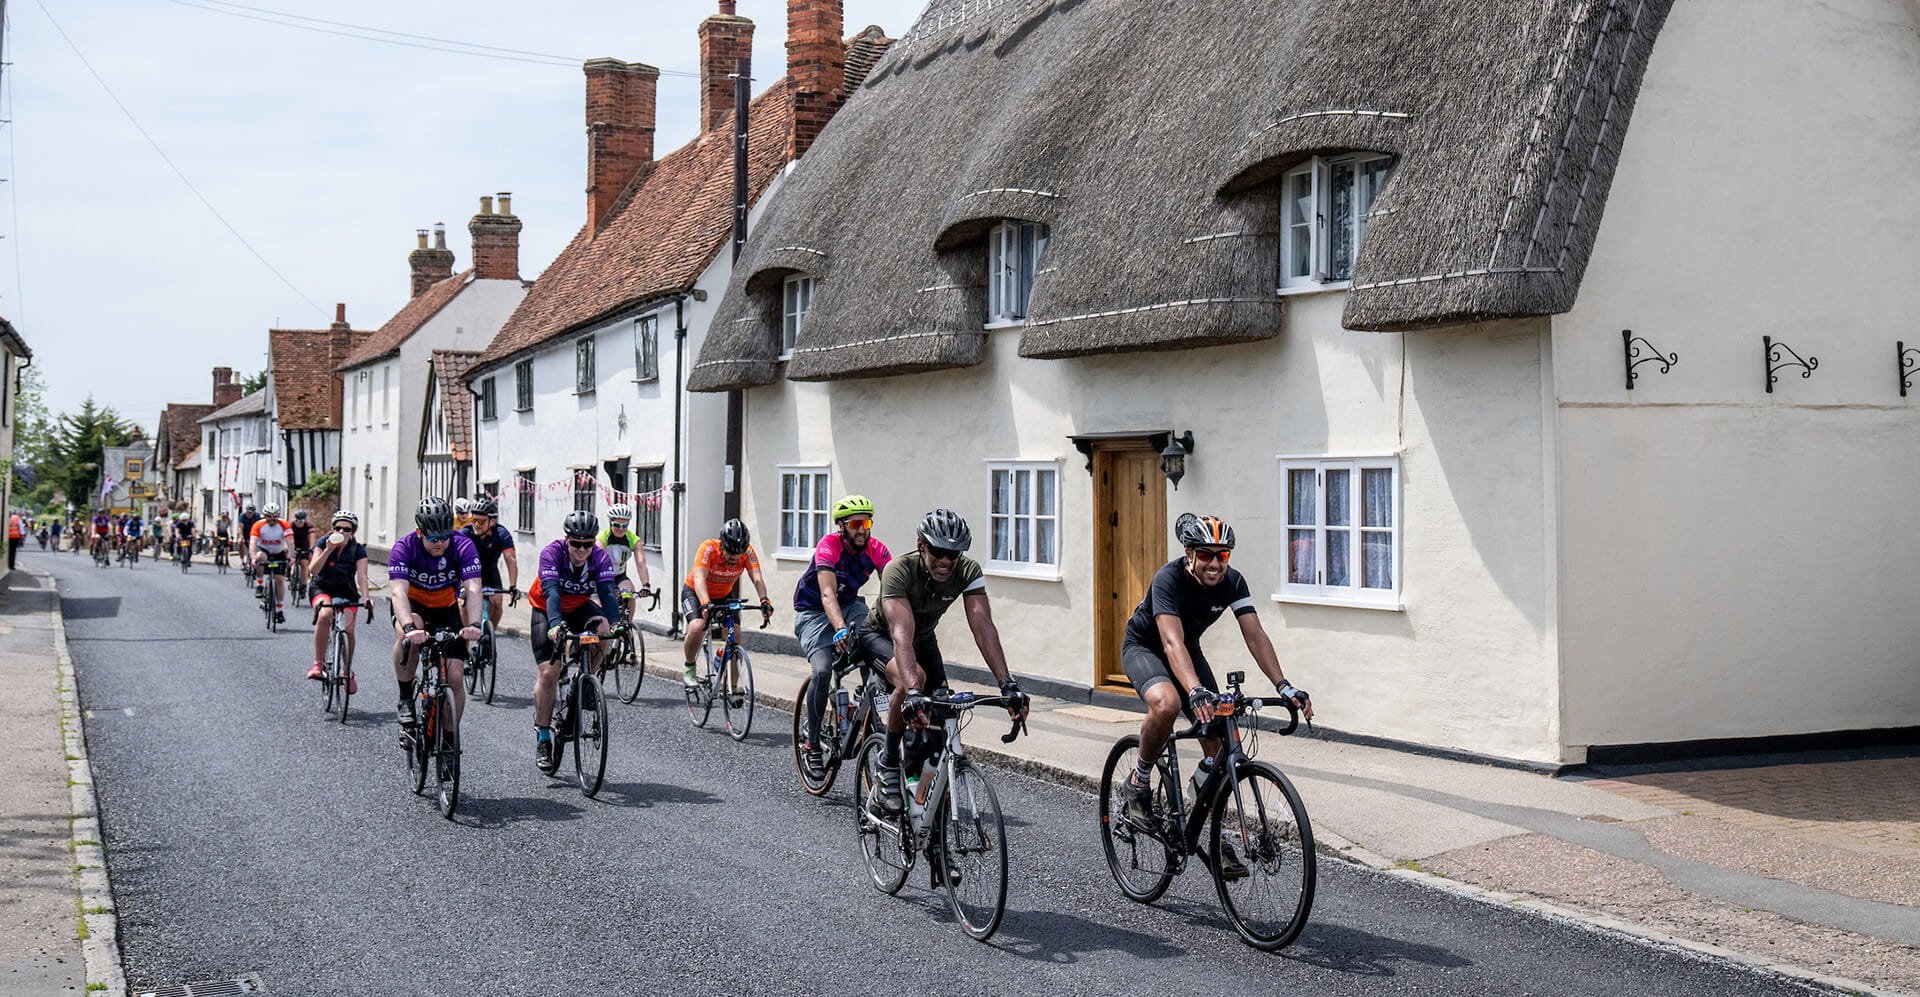 Cyclists ride past a thatched cottage